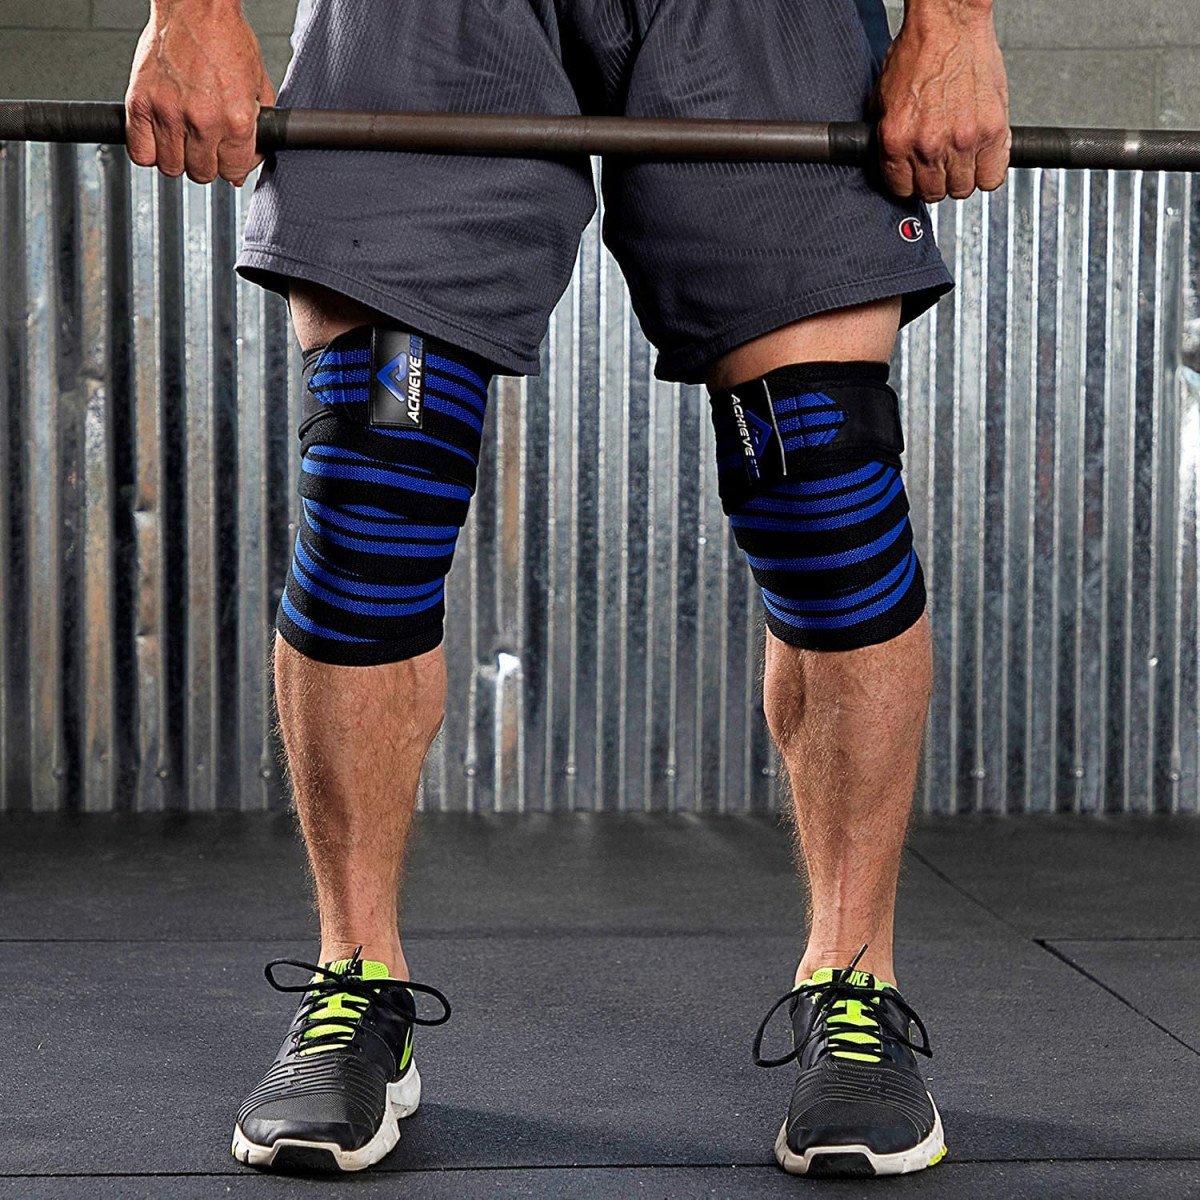 How Much Do Knee Wraps Add To Squat